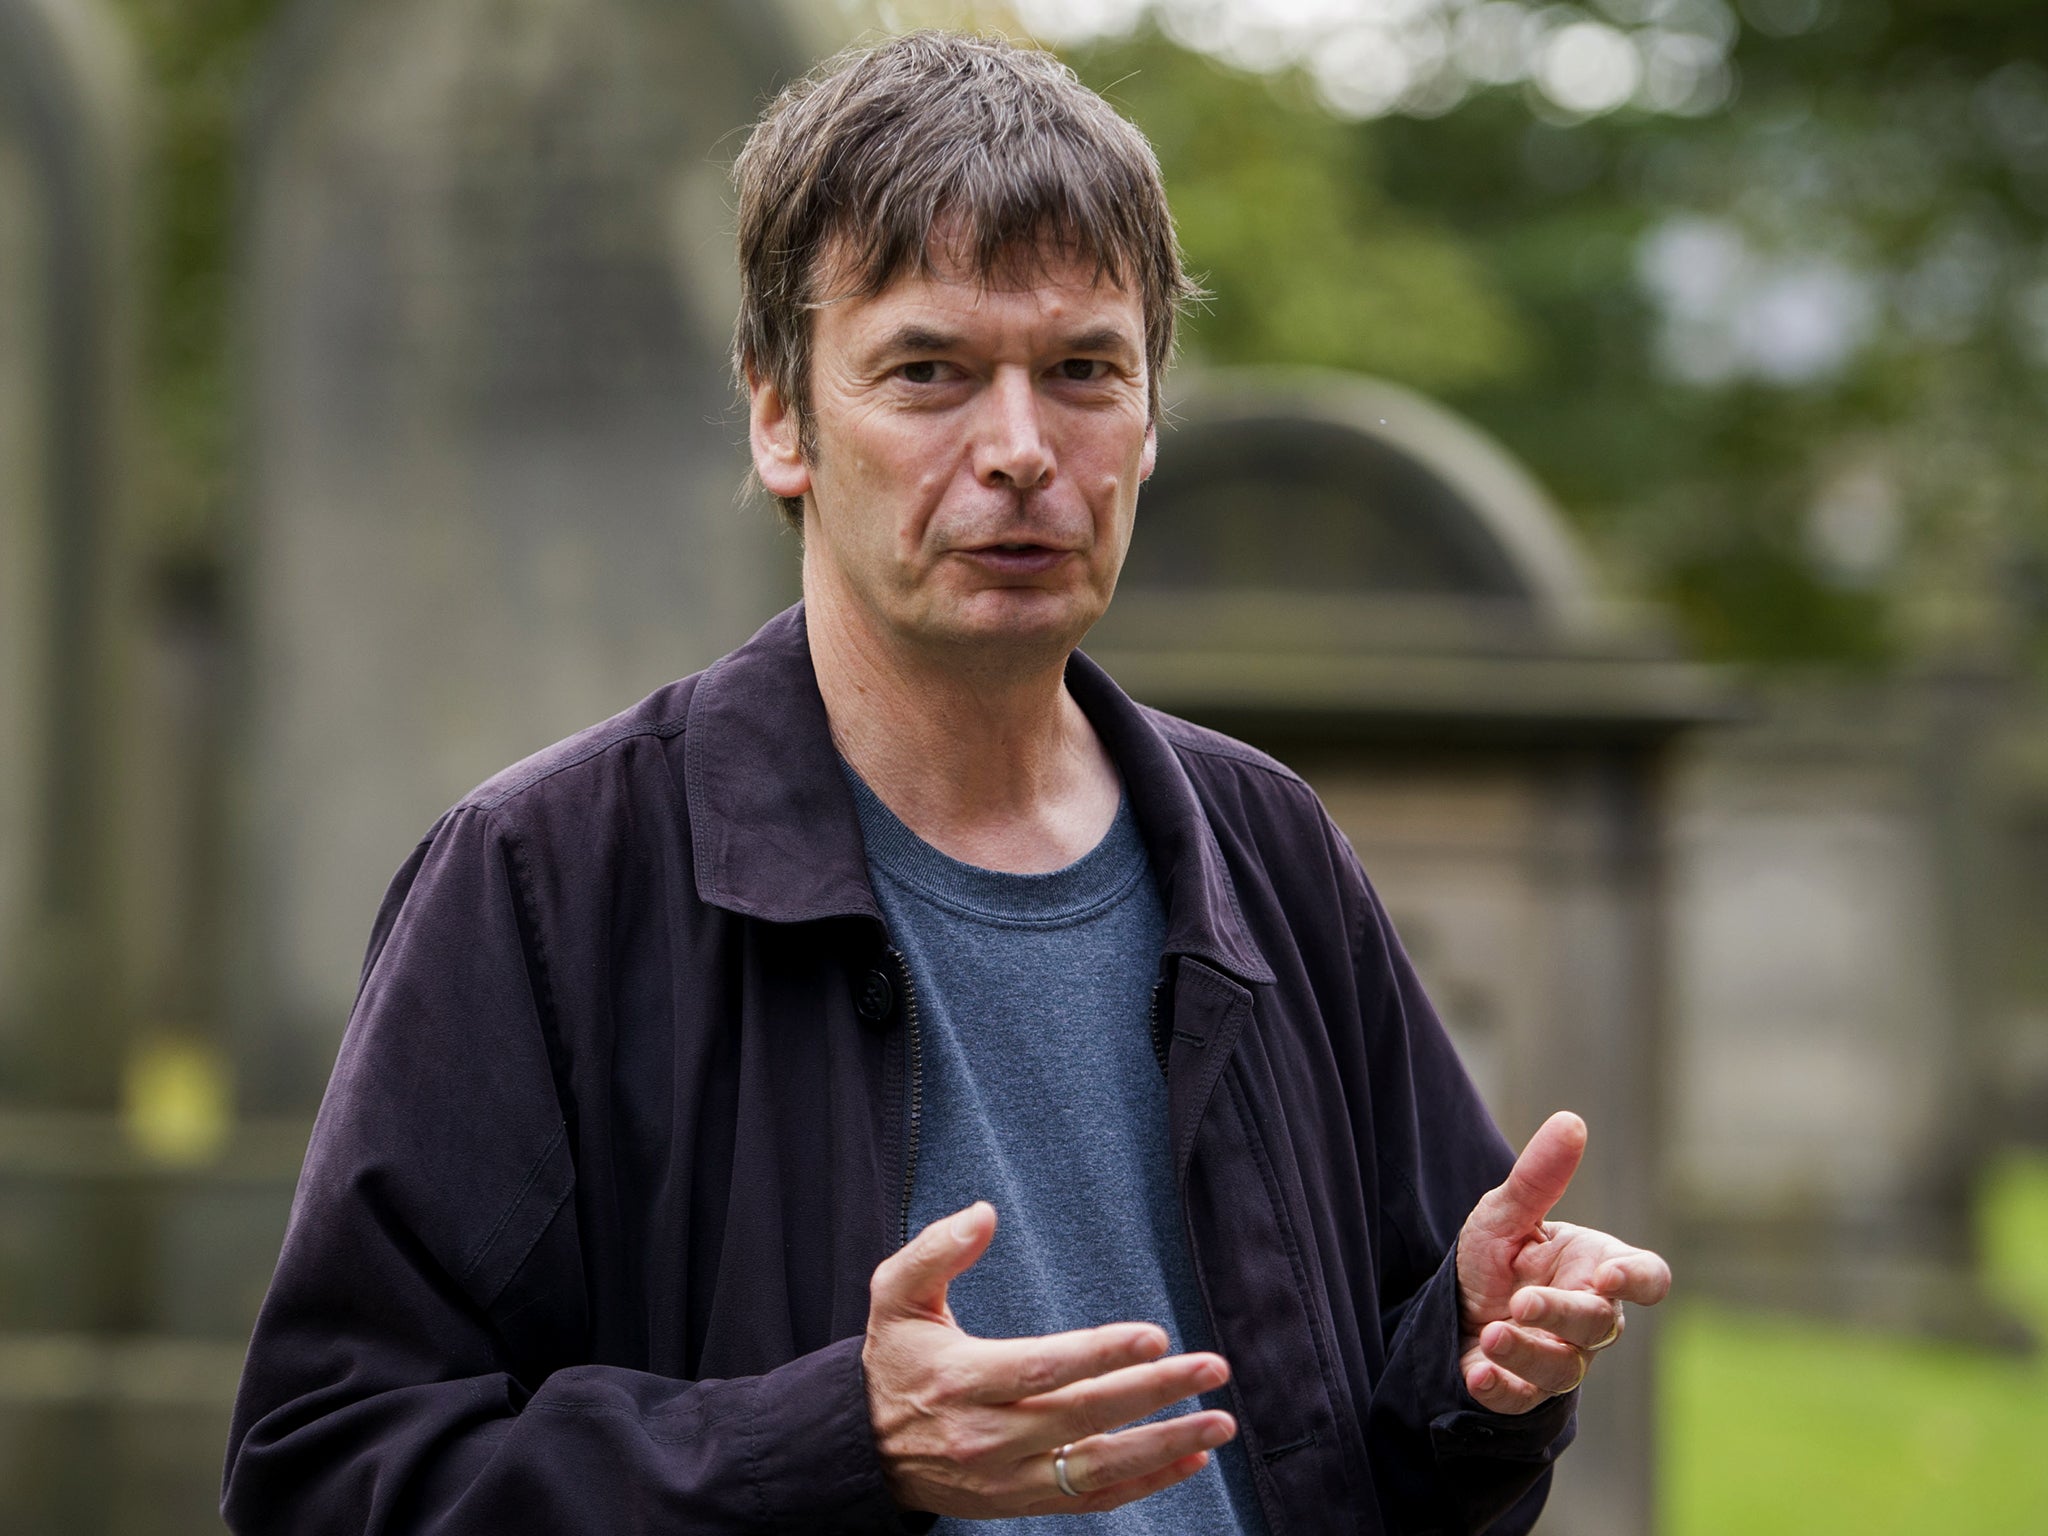 After finishing an MA at the University of Edinburgh, Ian Rankin dropped out of his PhD, but is now publishing his 21st novel in the Rebus series